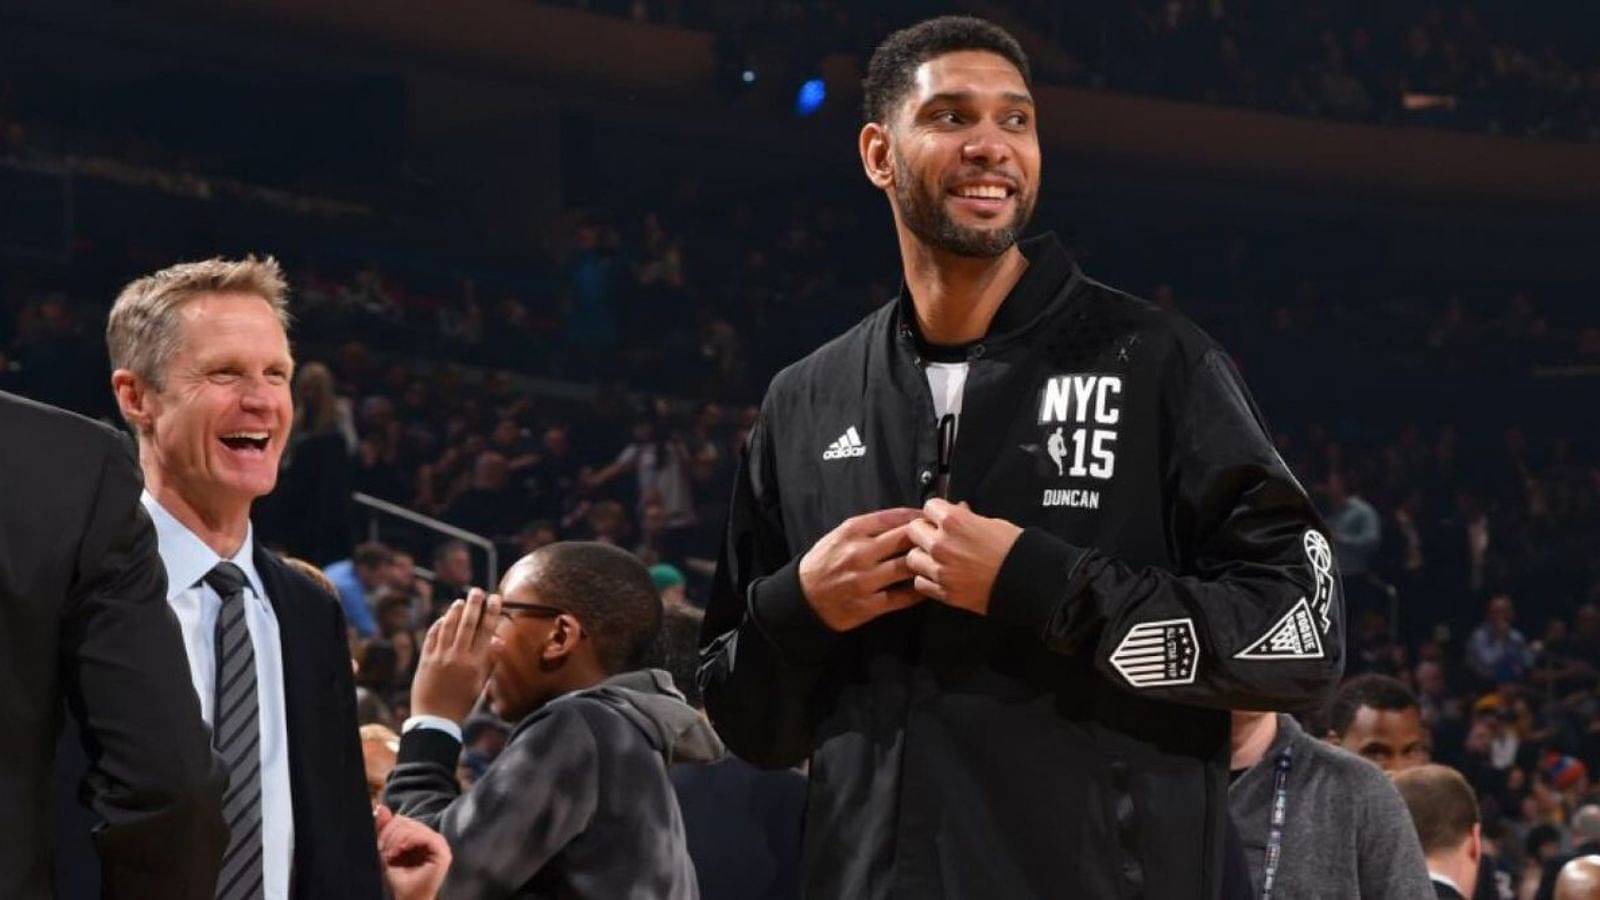 “Hey Steve Kerr! If we score more points, we win the game?!”: Tim Duncan mocked 9x NBA champ’s game plan